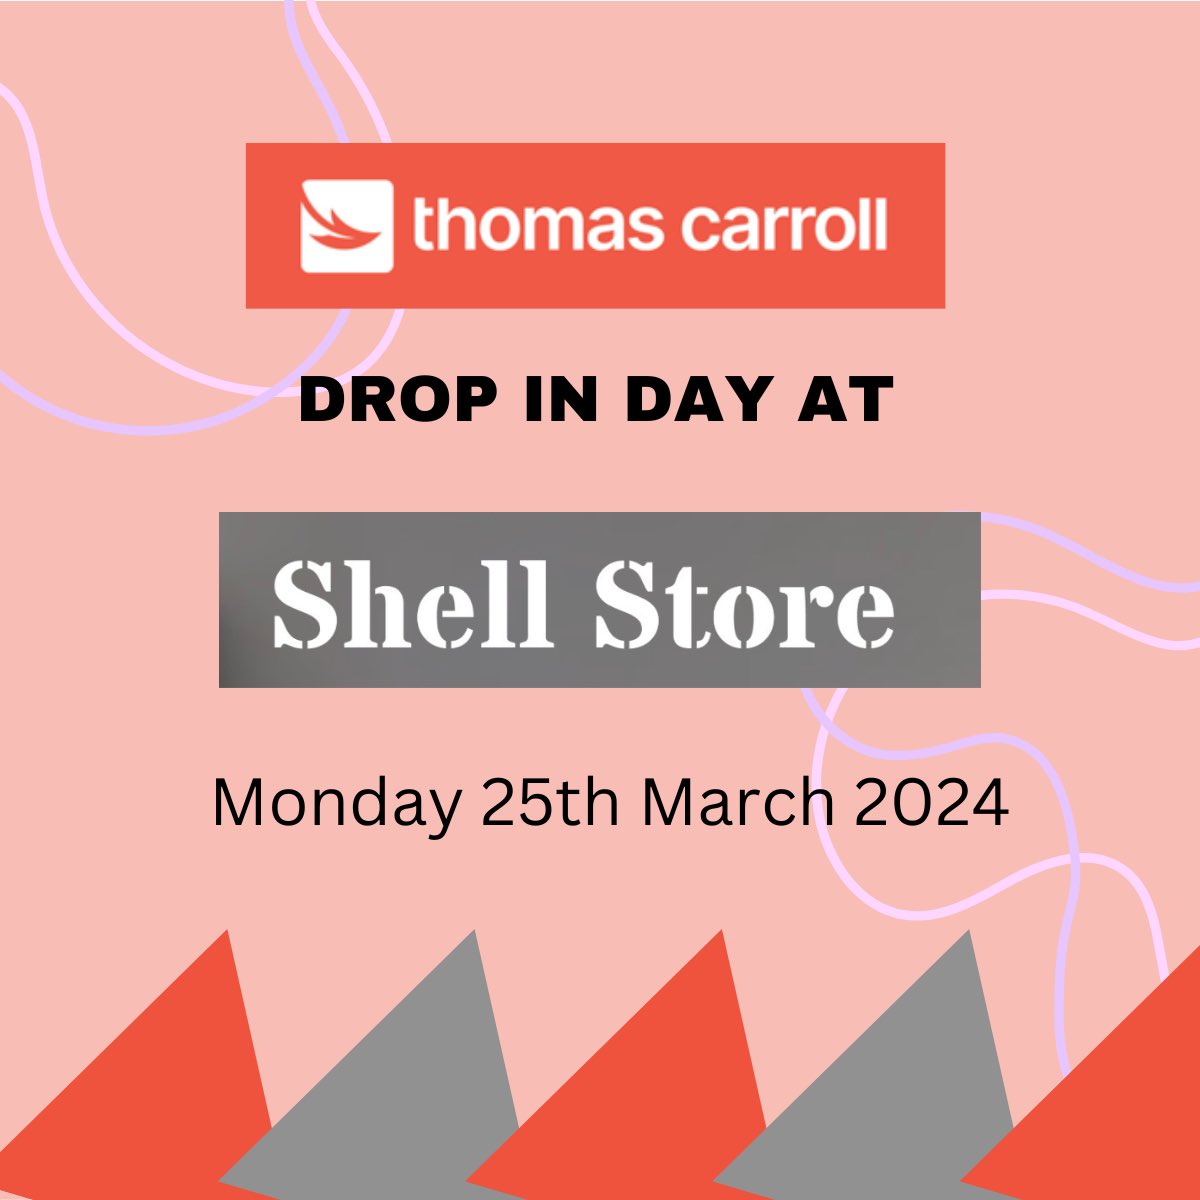 NEXT WEEK - Monday 25th March will be the last of the first run of Drop In Days with @thomascarrollgp which are being hosted by the fantastic @shellstoreheref! 

Feel free to ‘drop by’ - we will be happy to help!